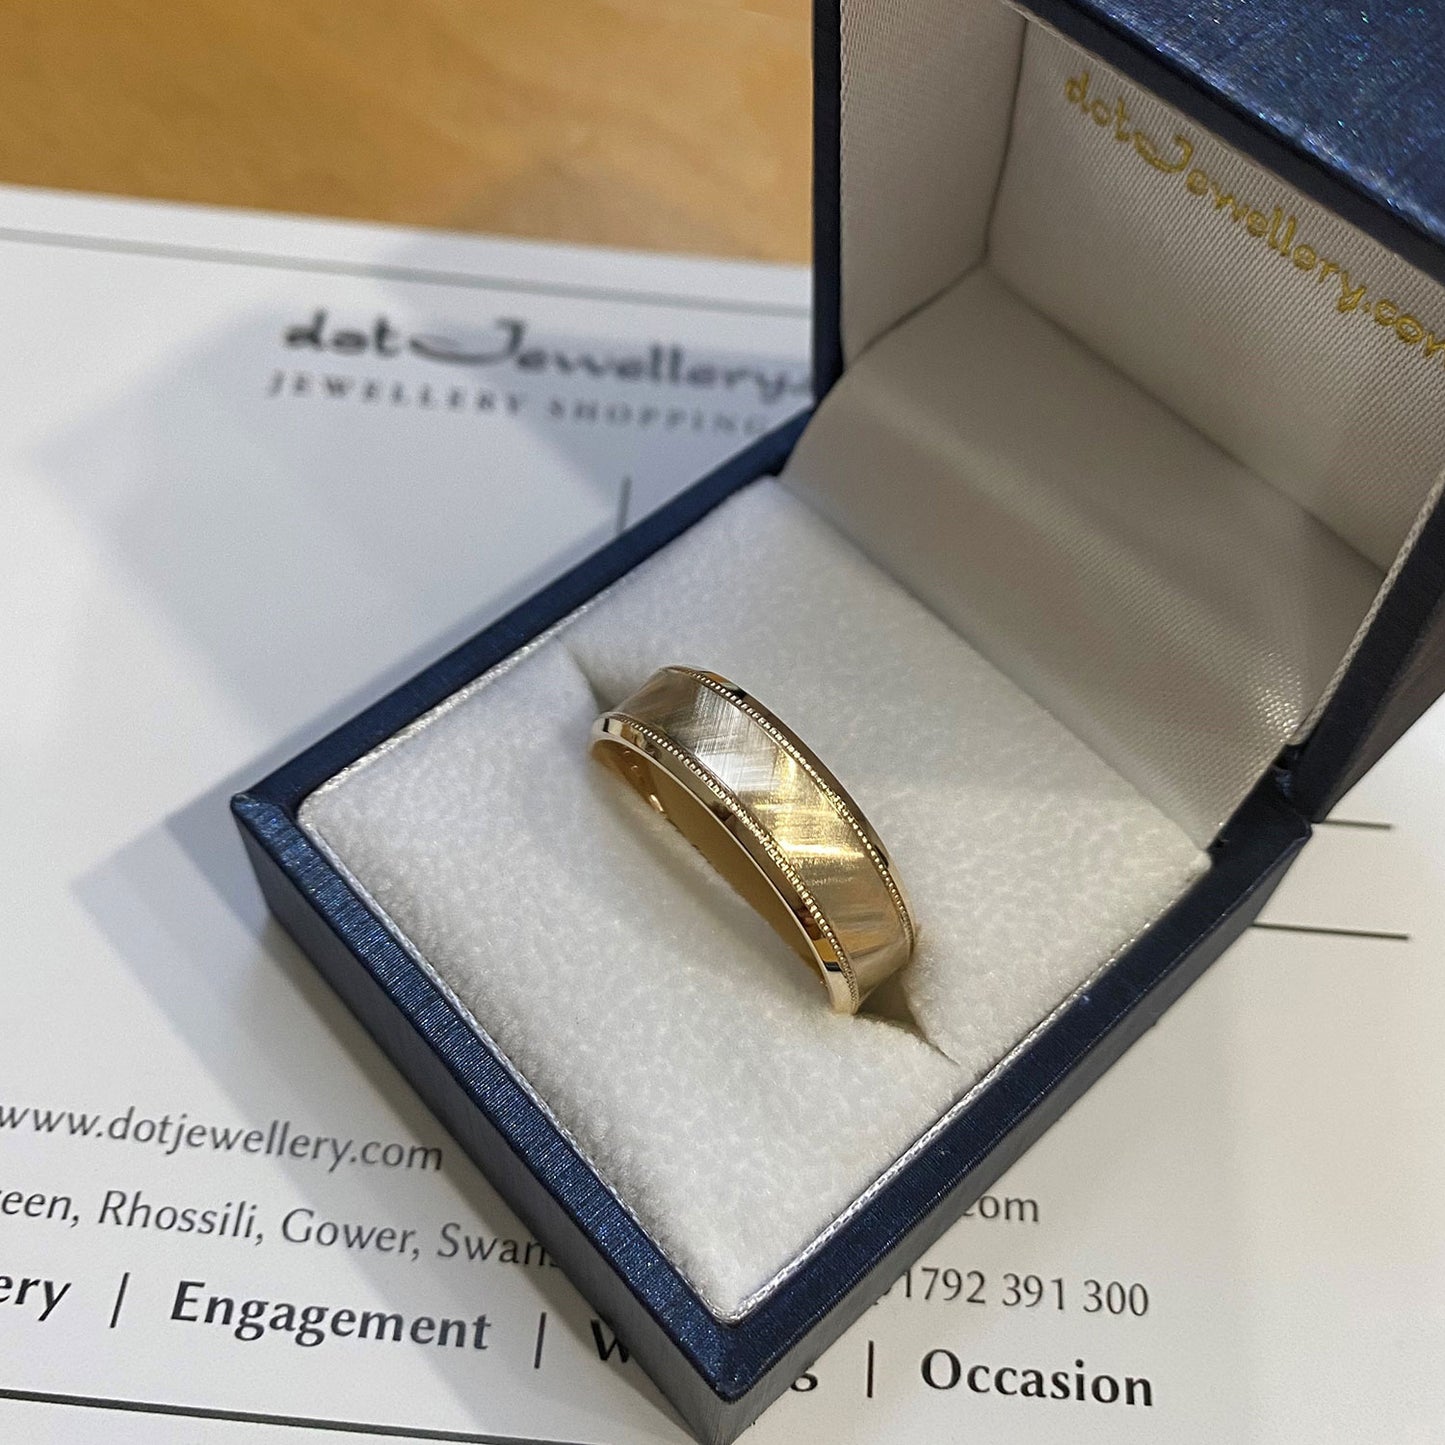 Hatched Centre And Millgrain Patterned 9ct Yellow Gold 7mm Wedding Ring